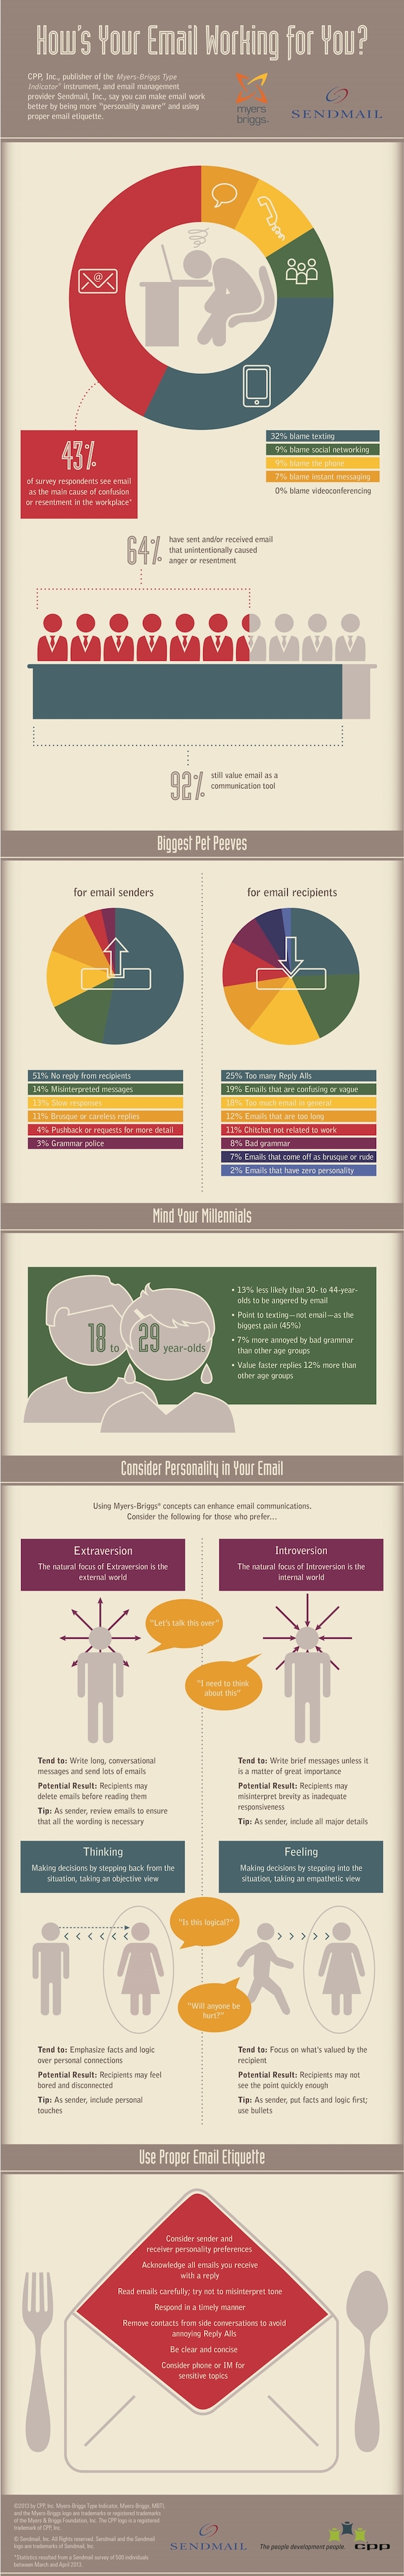 Why Work Emails Cause Anger & Confusion (Infographic)